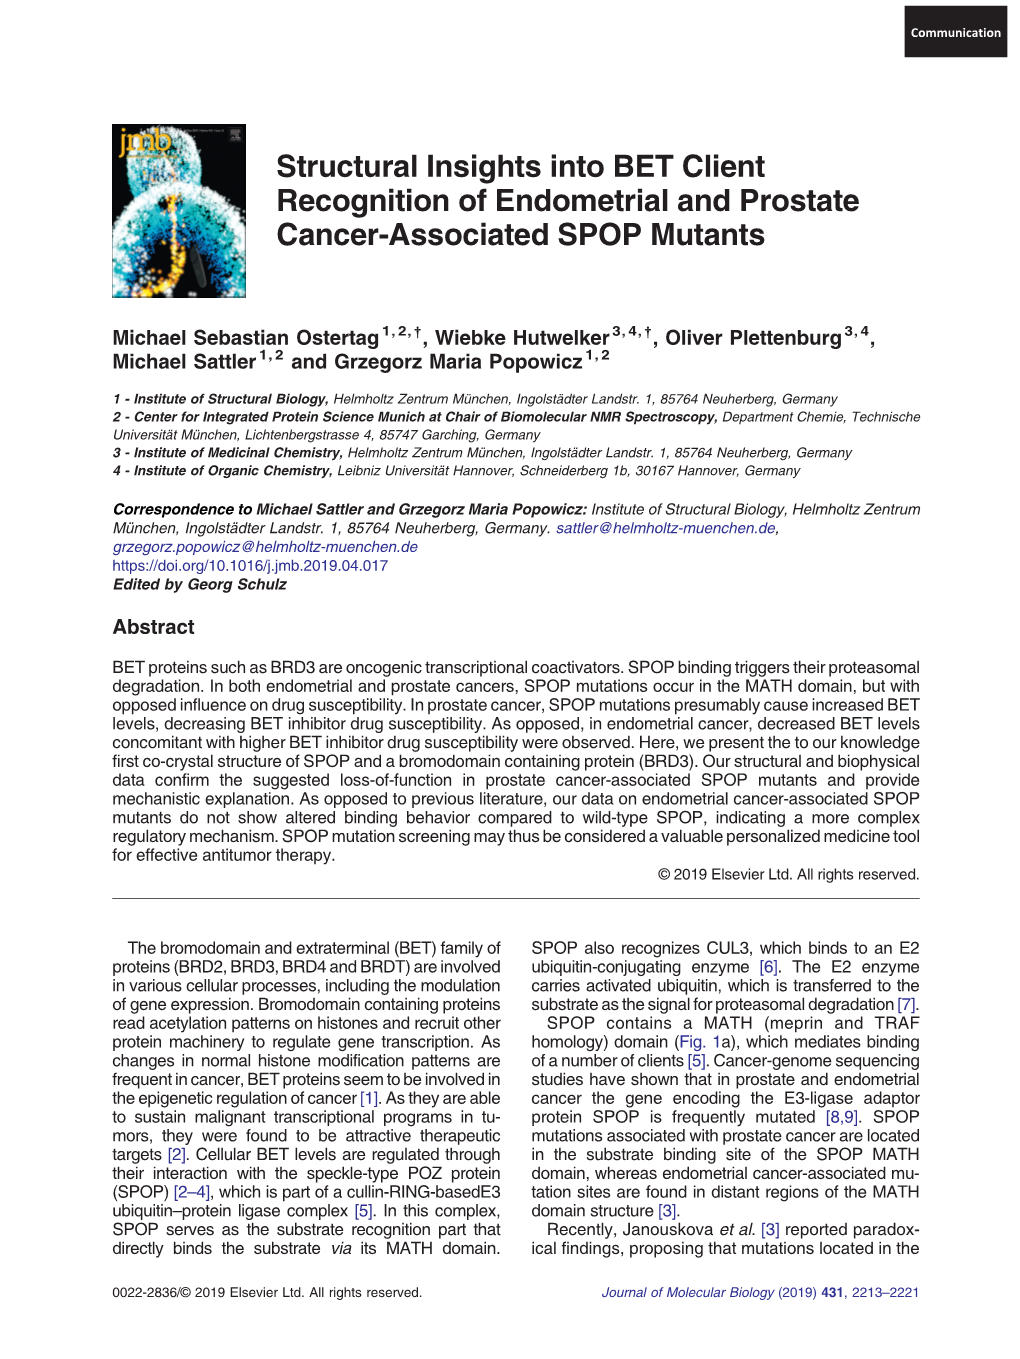 Structural Insights Into BET Client Recognition of Endometrial and Prostate Cancer-Associated SPOP Mutants